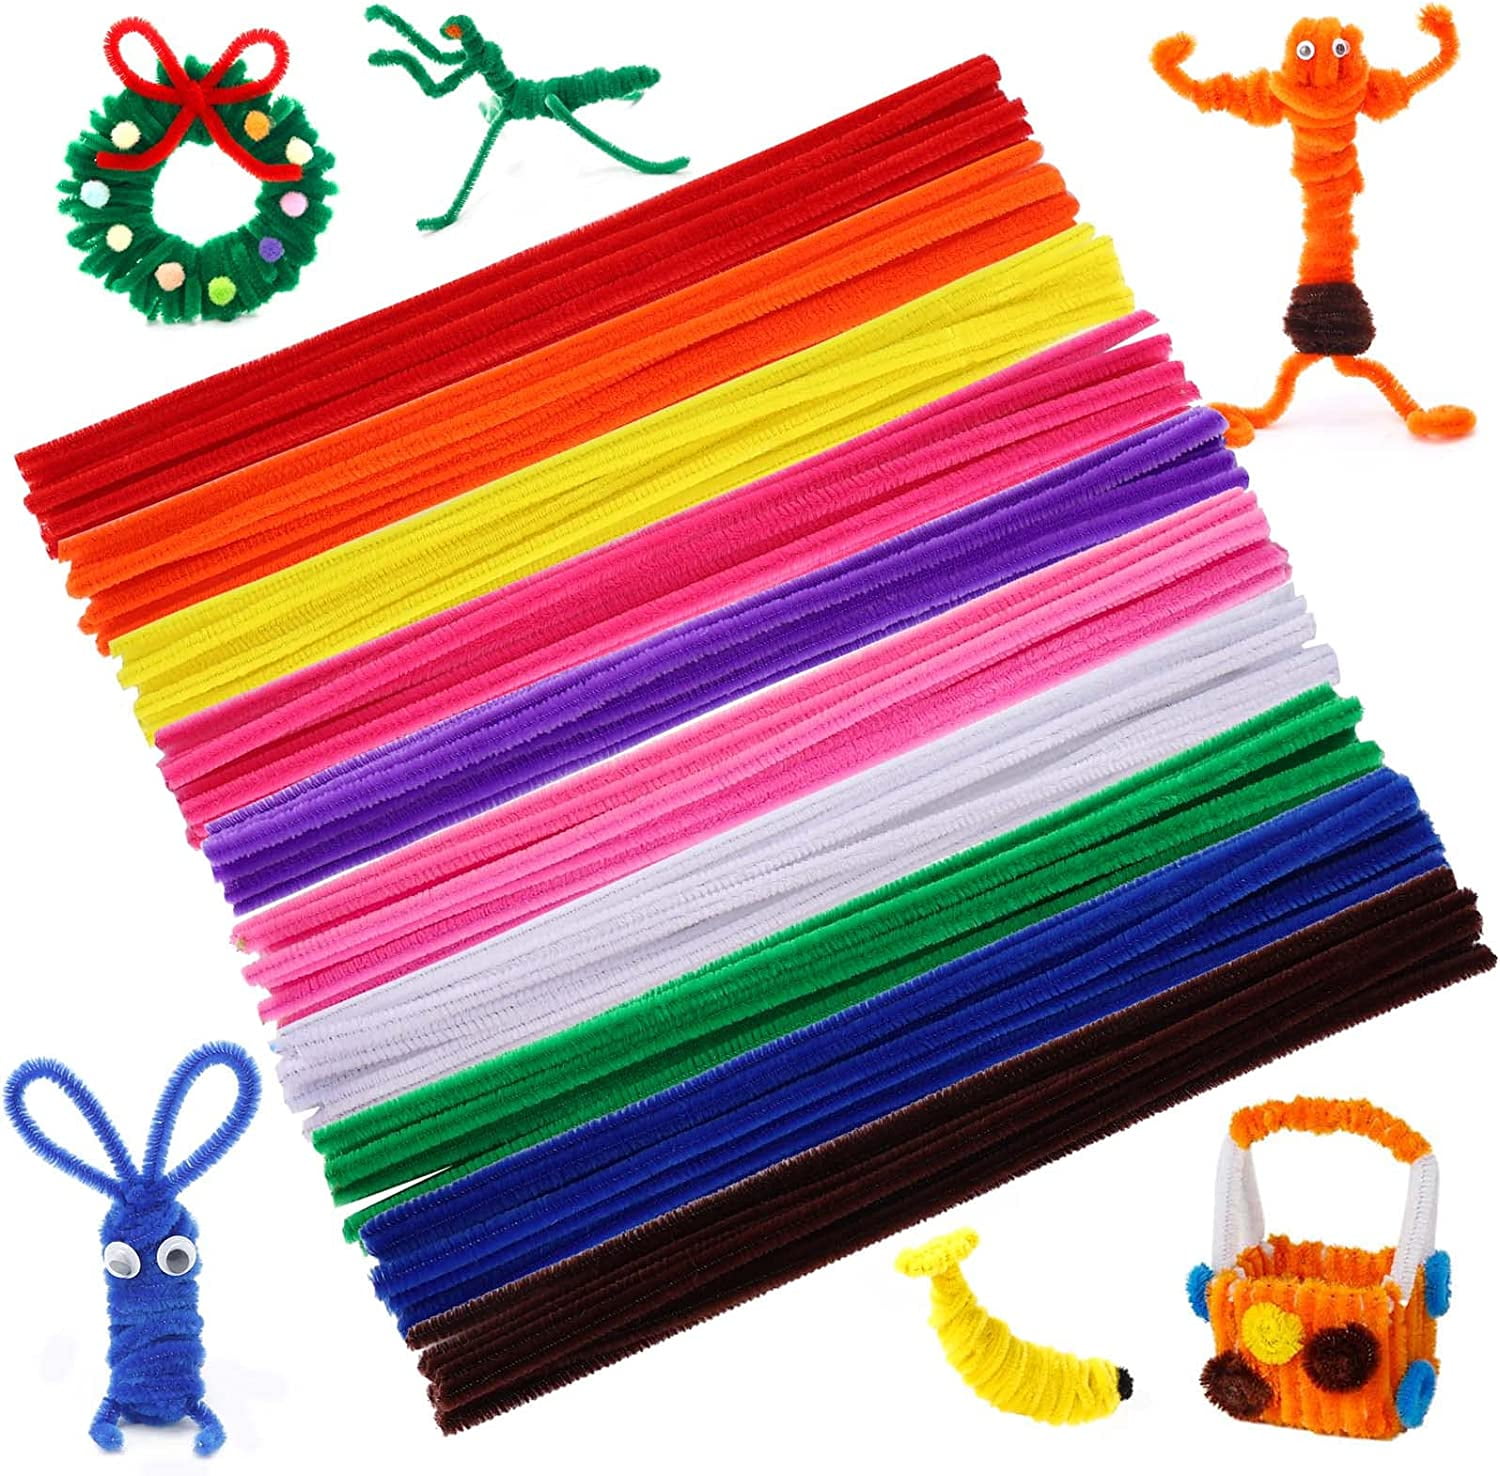 Craft Pipe Cleaners 80 gram (~100 Pieces) 10 Colors - 30 cm (12 inch) Long  - 6